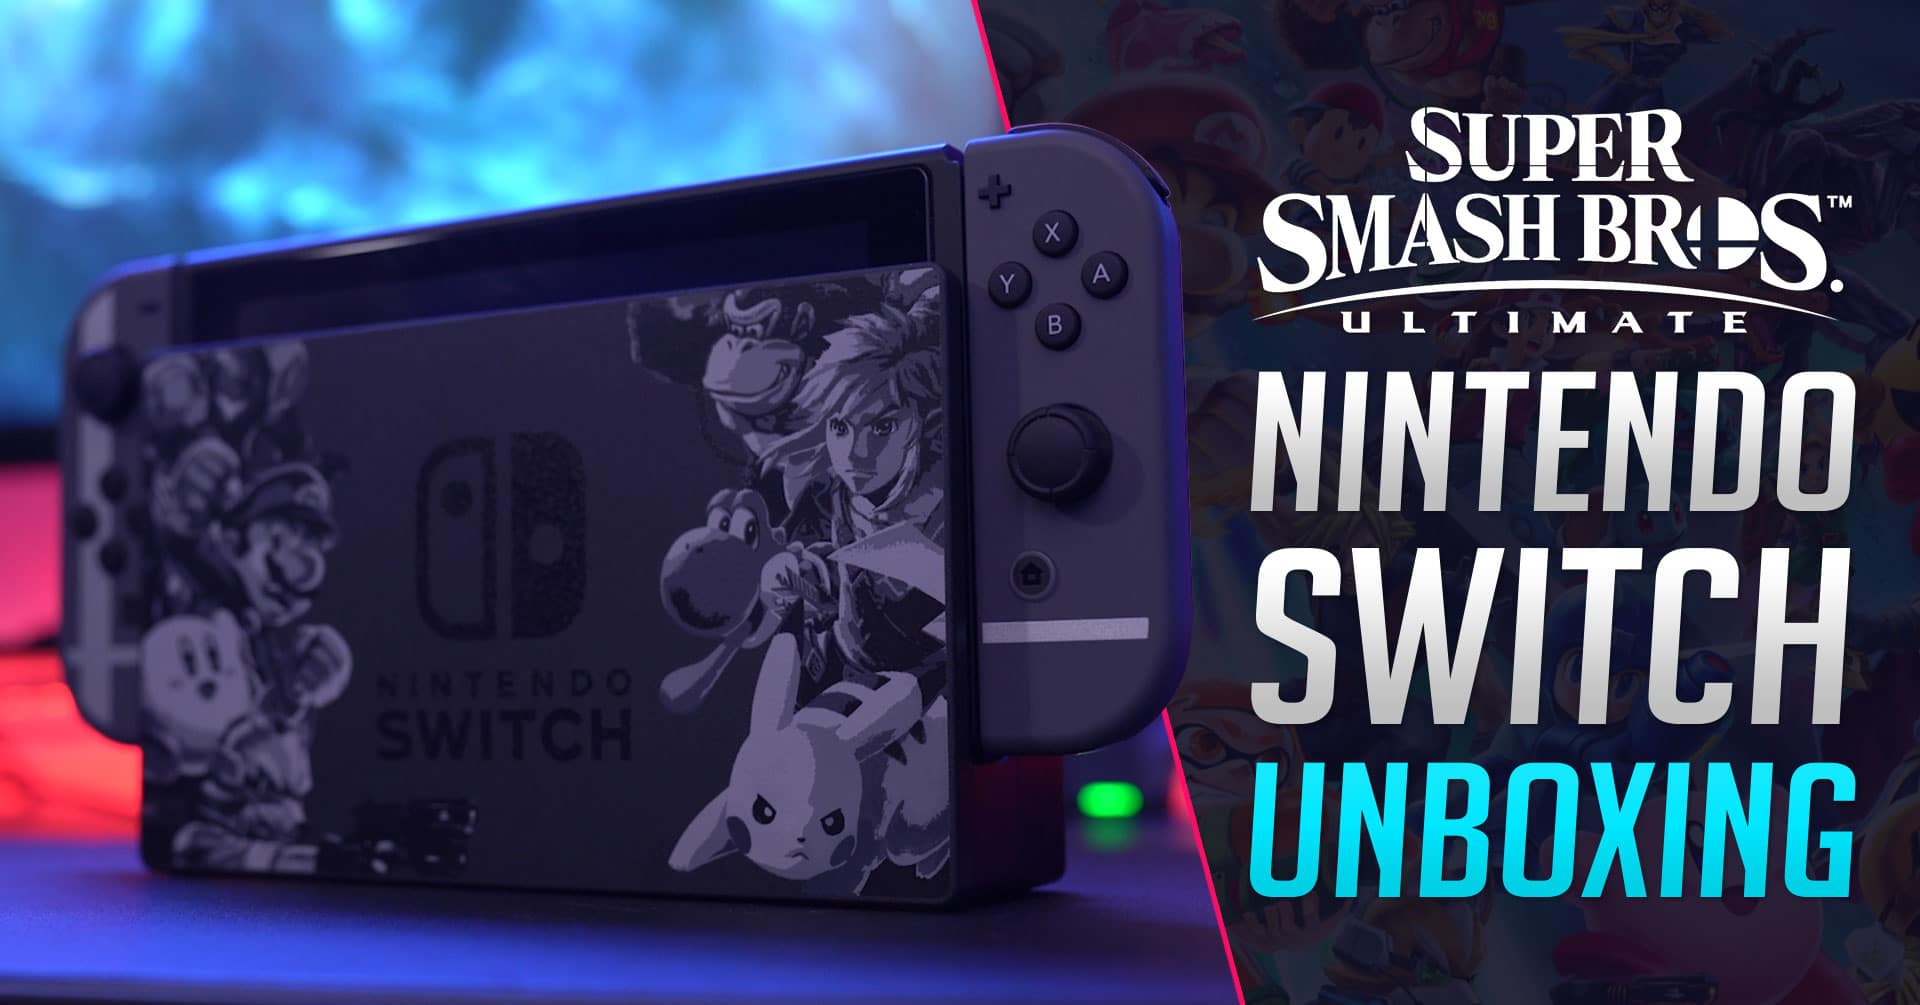 Nintendo Switch Super Smash Bros. Ultimate Edition - Unboxing & Review -  FuryPixel® | Gaming • Technology • Anime | Nintendo-Switch-Spiele